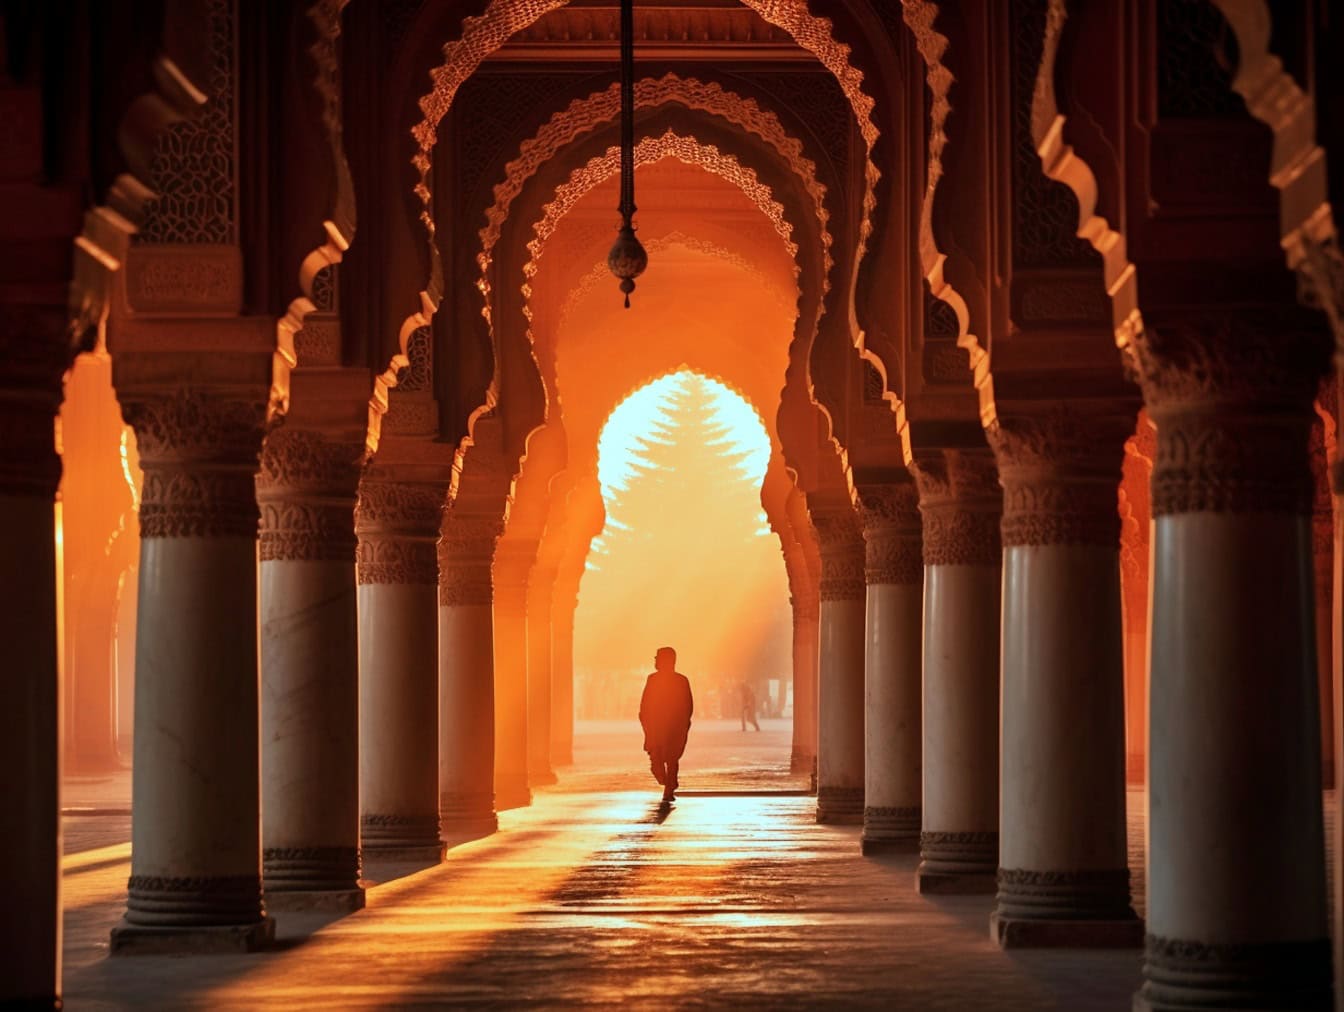 Sunset with the silhouette of a man walking through the ornate arch of a beautiful Islamic mosque with traditional Arabic architecture